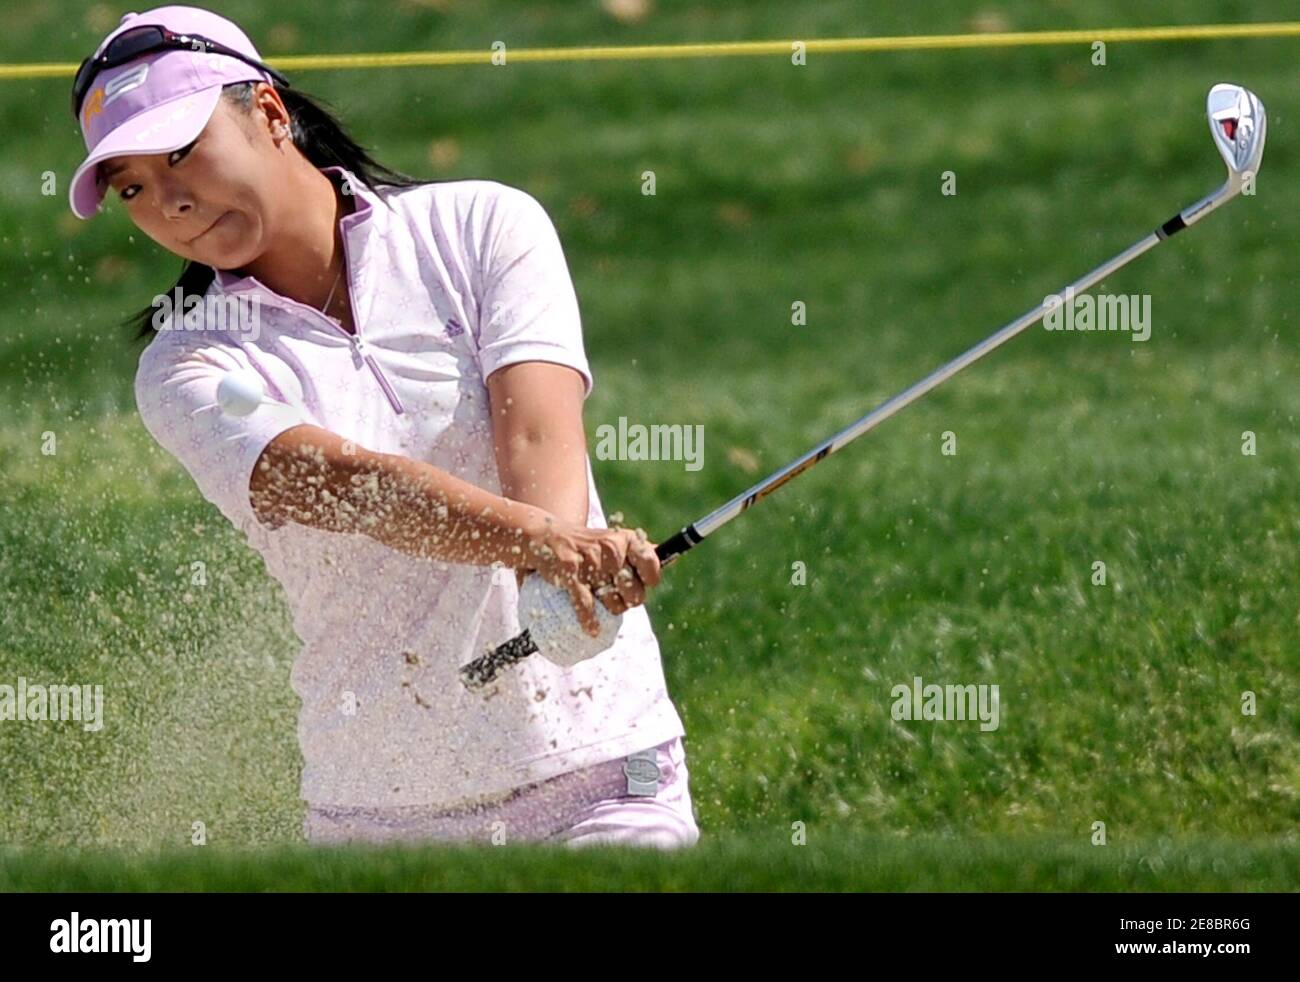 Yuko Mitsuka, of Japan hits from the bunker onto the green at the second hole during the third round of the LPGA's Kraft Nabisco Women's golf championship in Rancho Mirage, California April 3, 2010.  REUTERS/Gus Ruelas (UNITED STATES - Tags: SPORT GOLF) Stock Photo